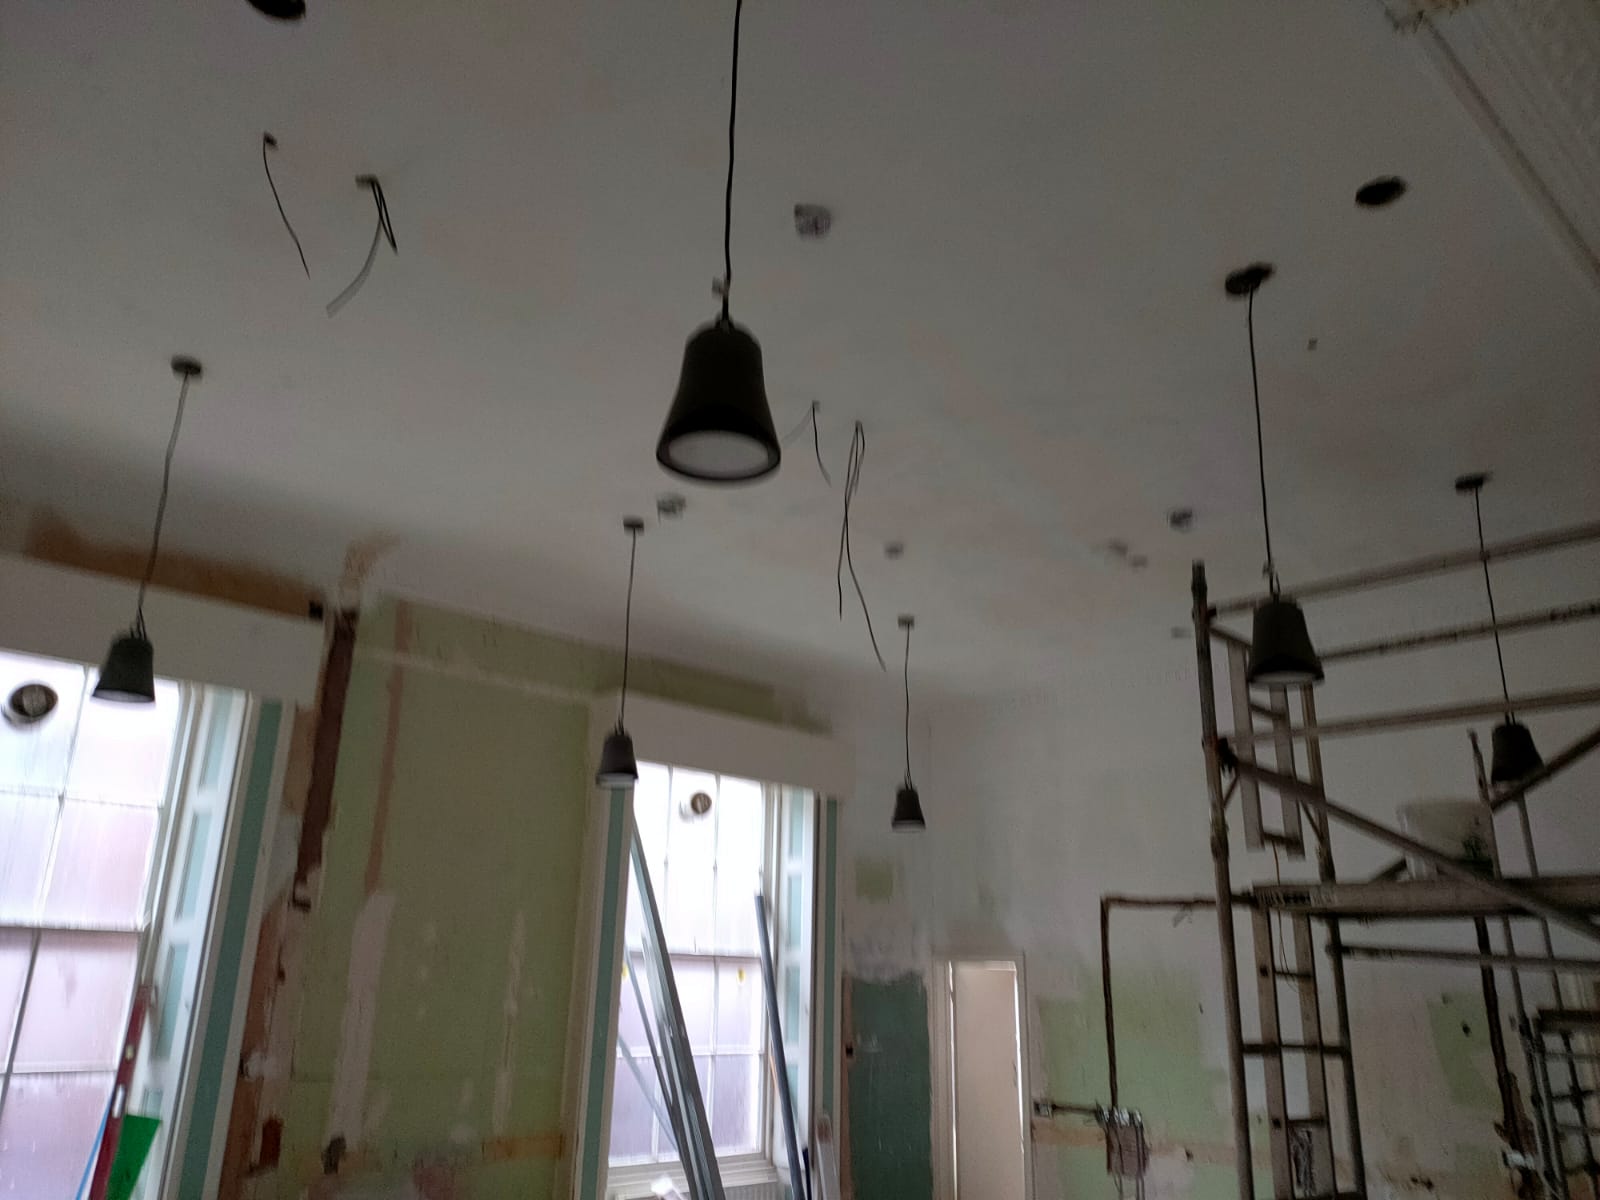 Multiple light fixtures dangling down with the wiring on the celling